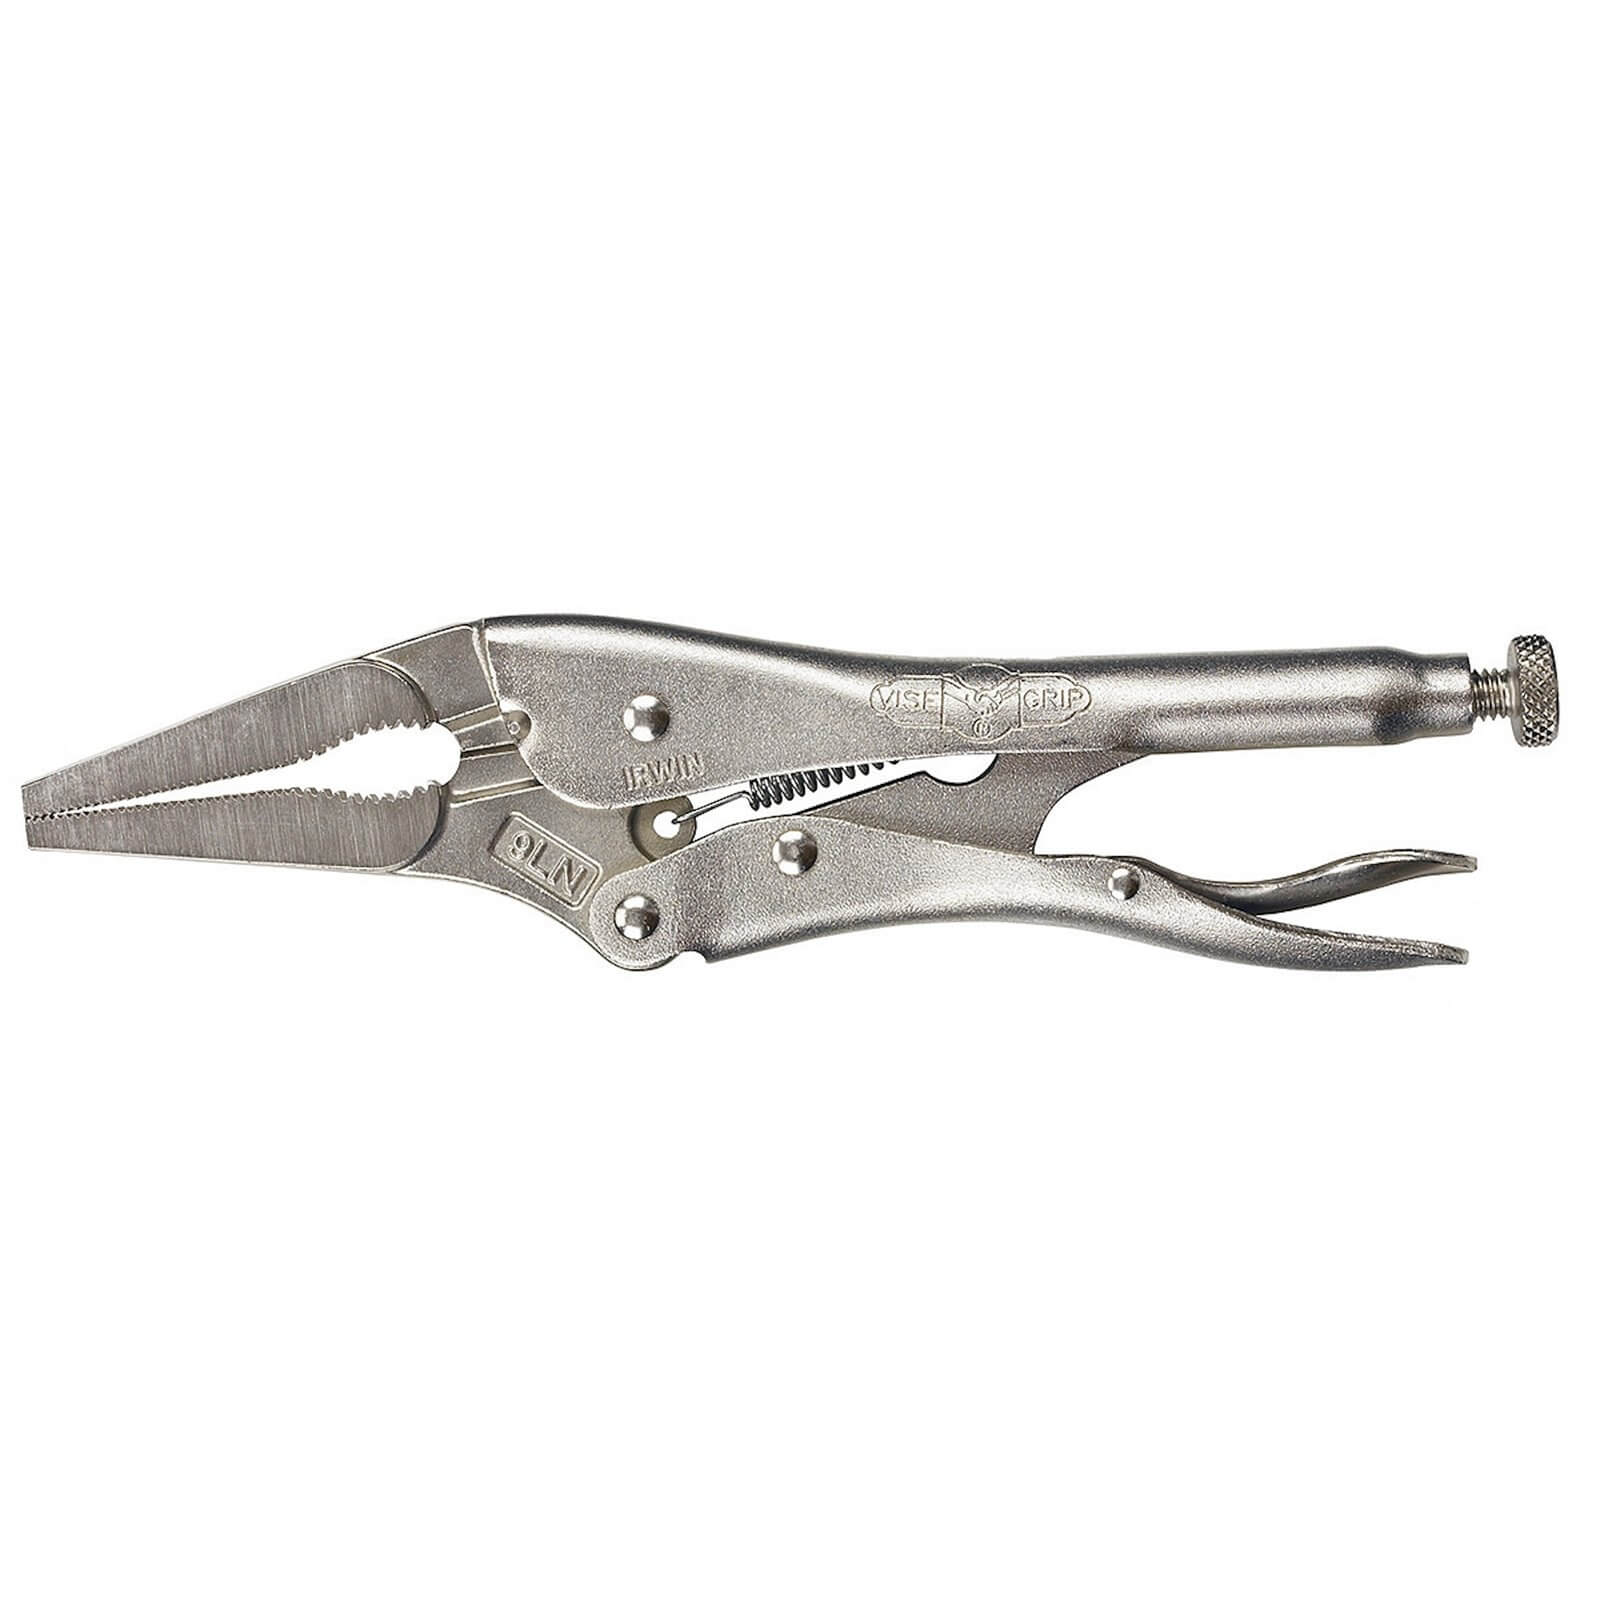 Irwin Vise-Grip Original Long Nose Locking Pliers with Wire Cutter - 225mm